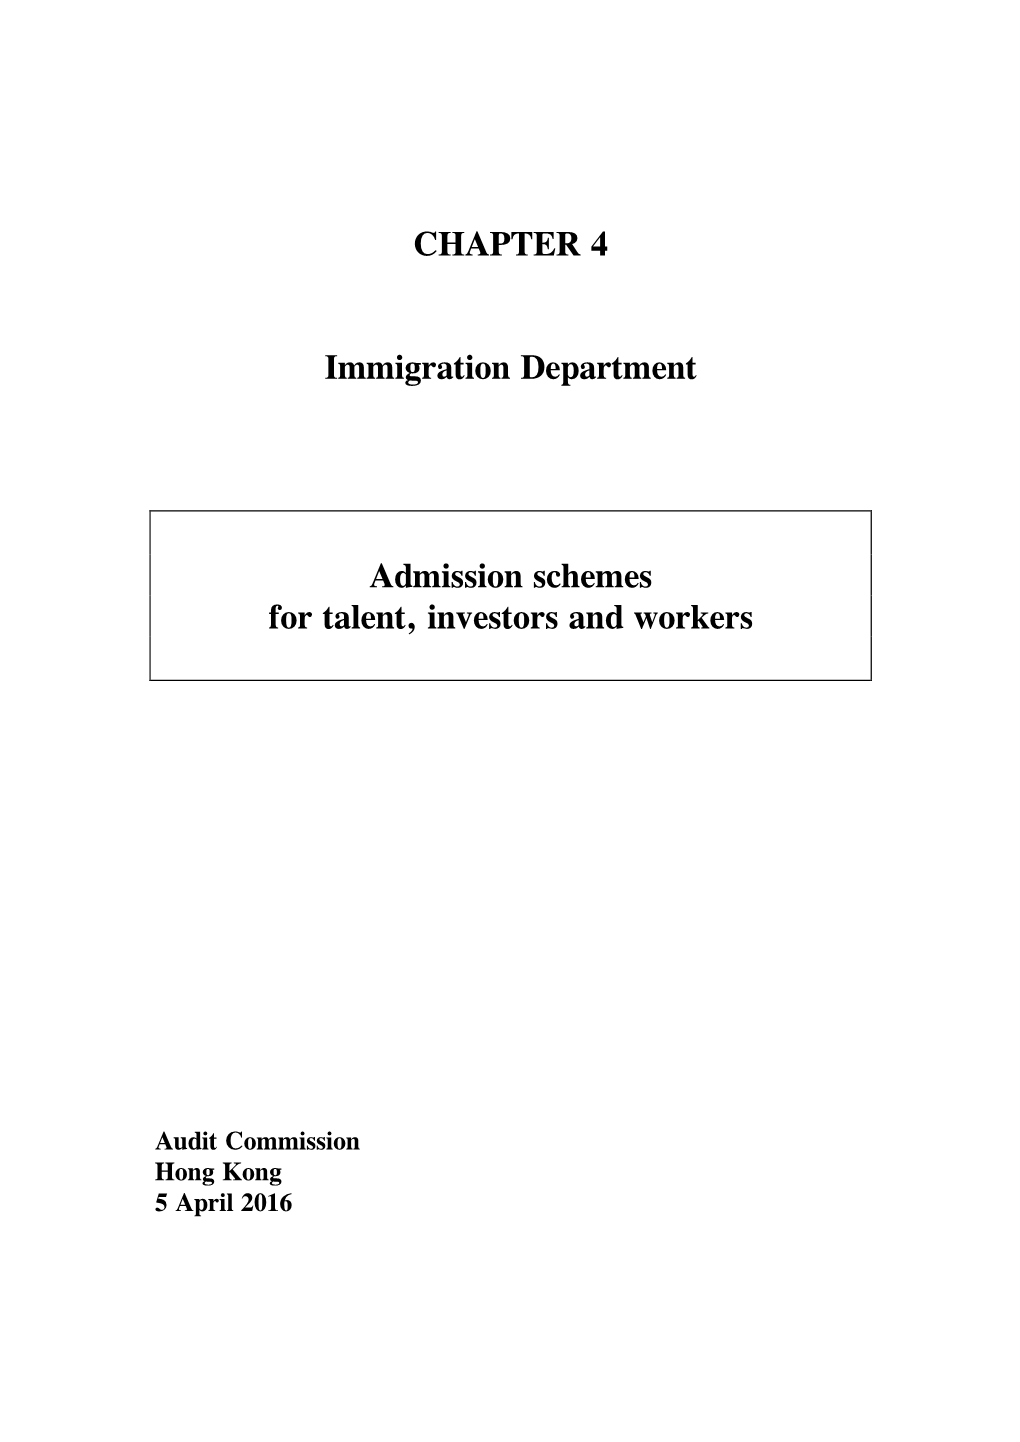 CHAPTER 4 Immigration Department Admission Schemes for Talent